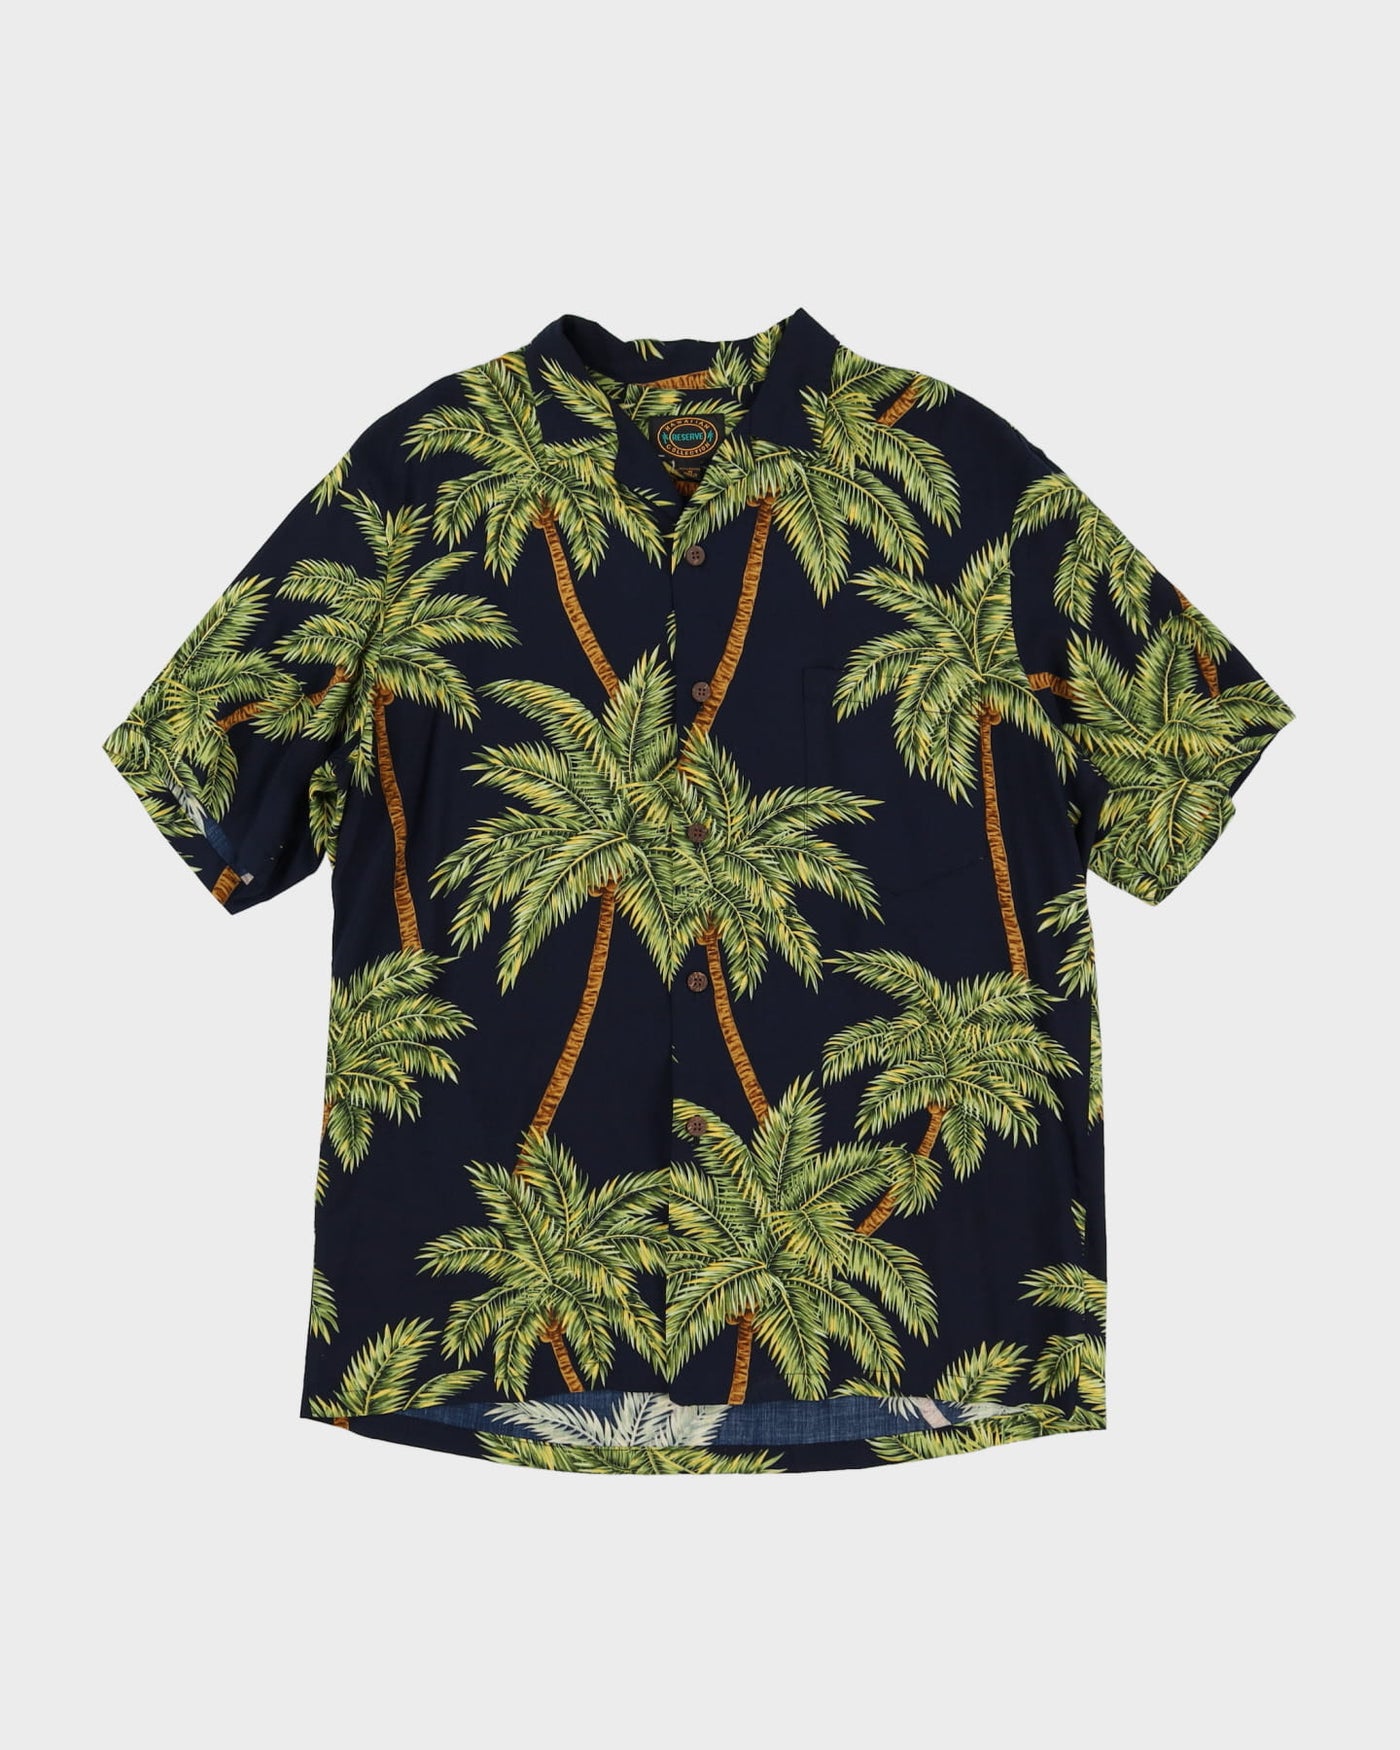 90s Black Palm Tree Patterned Short-Sleeve Hawaiian Relaxed Oversized Fit Shirt - M (XL)